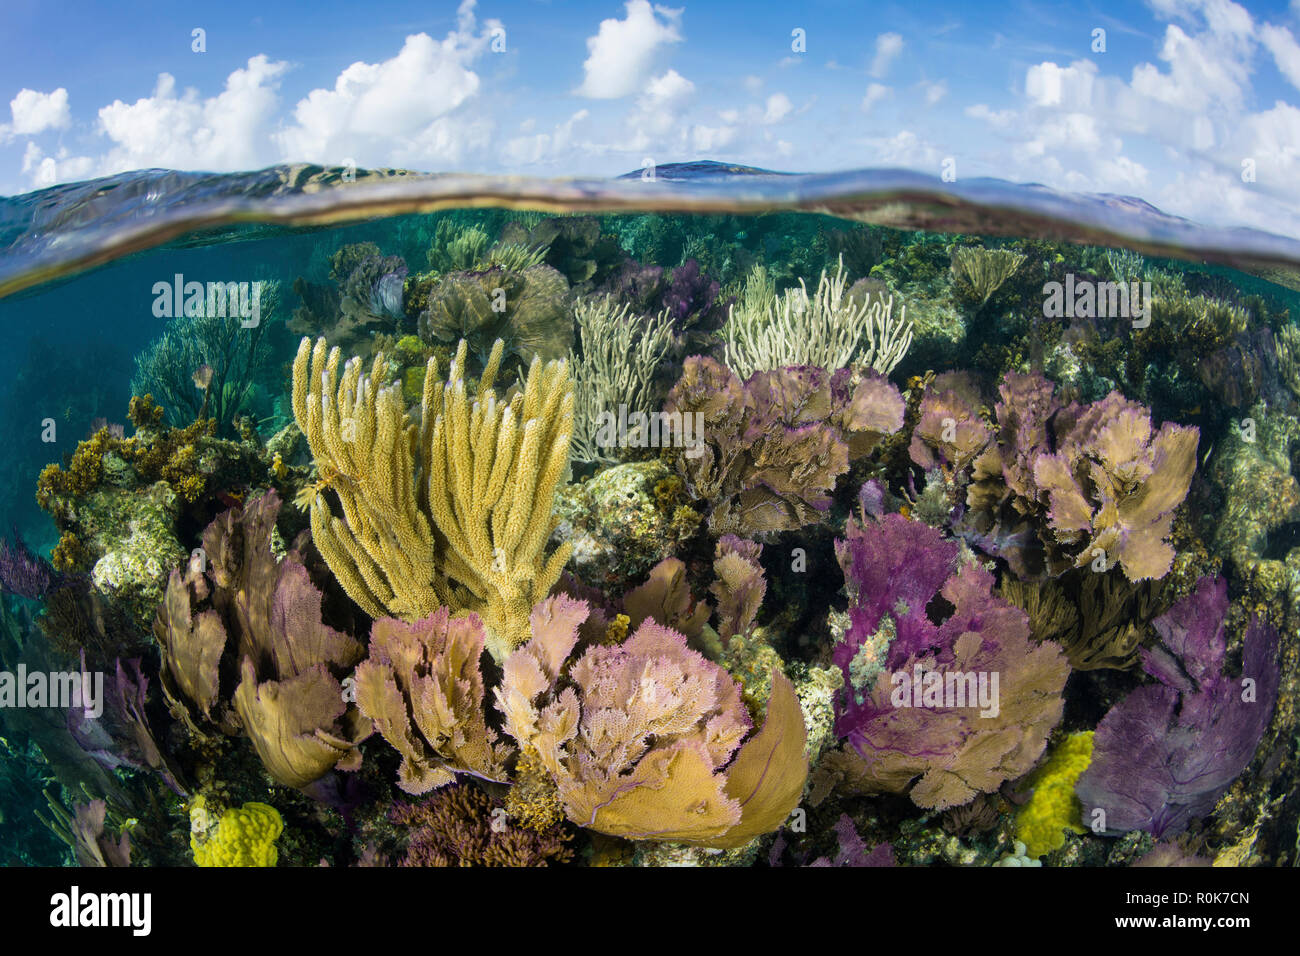 A split level view of a coral reef along the edge of Turneffe Atoll. Stock Photo